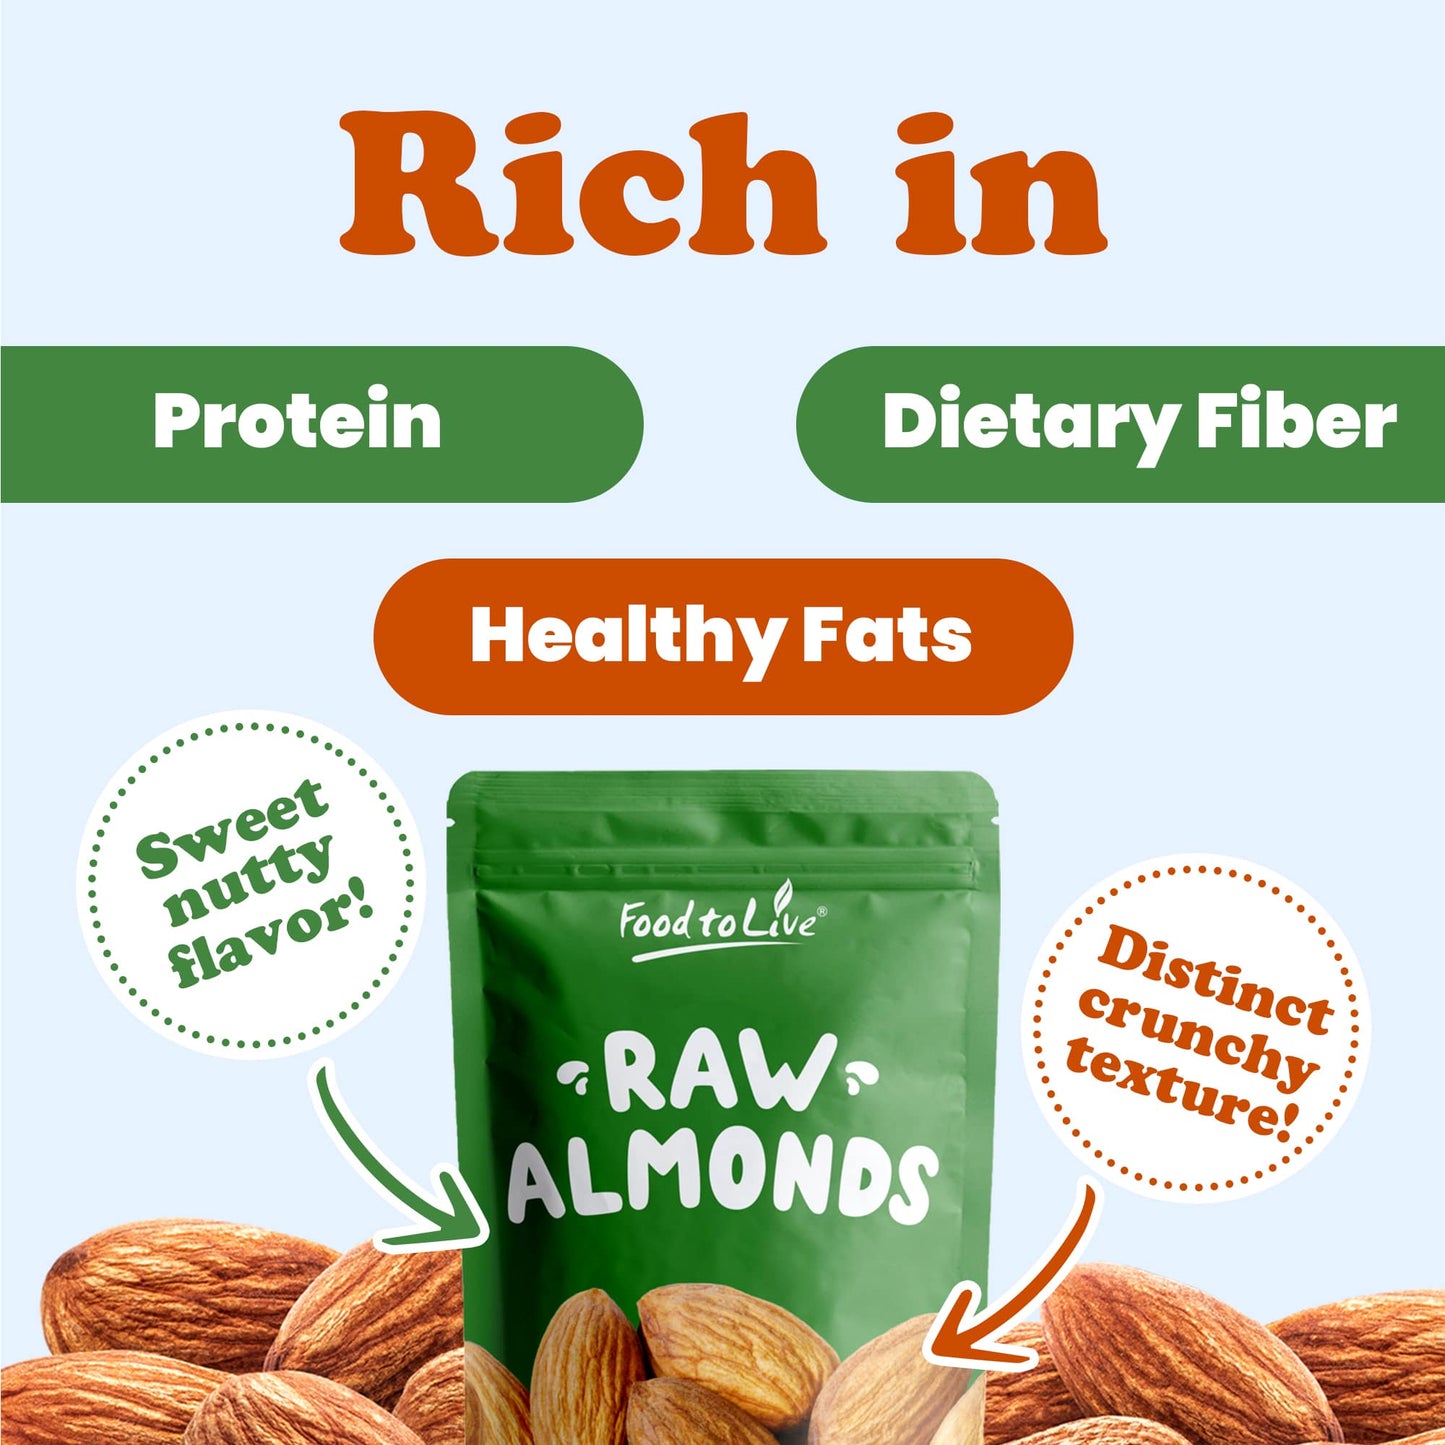 California Almonds — Supreme, Whole, Raw, Unsalted, Unroasted Nuts, Natural. Kosher, Vegan. Keto, Paleo, Low Sodium, Bulk. Great for Making Milk, Butter and Flour.